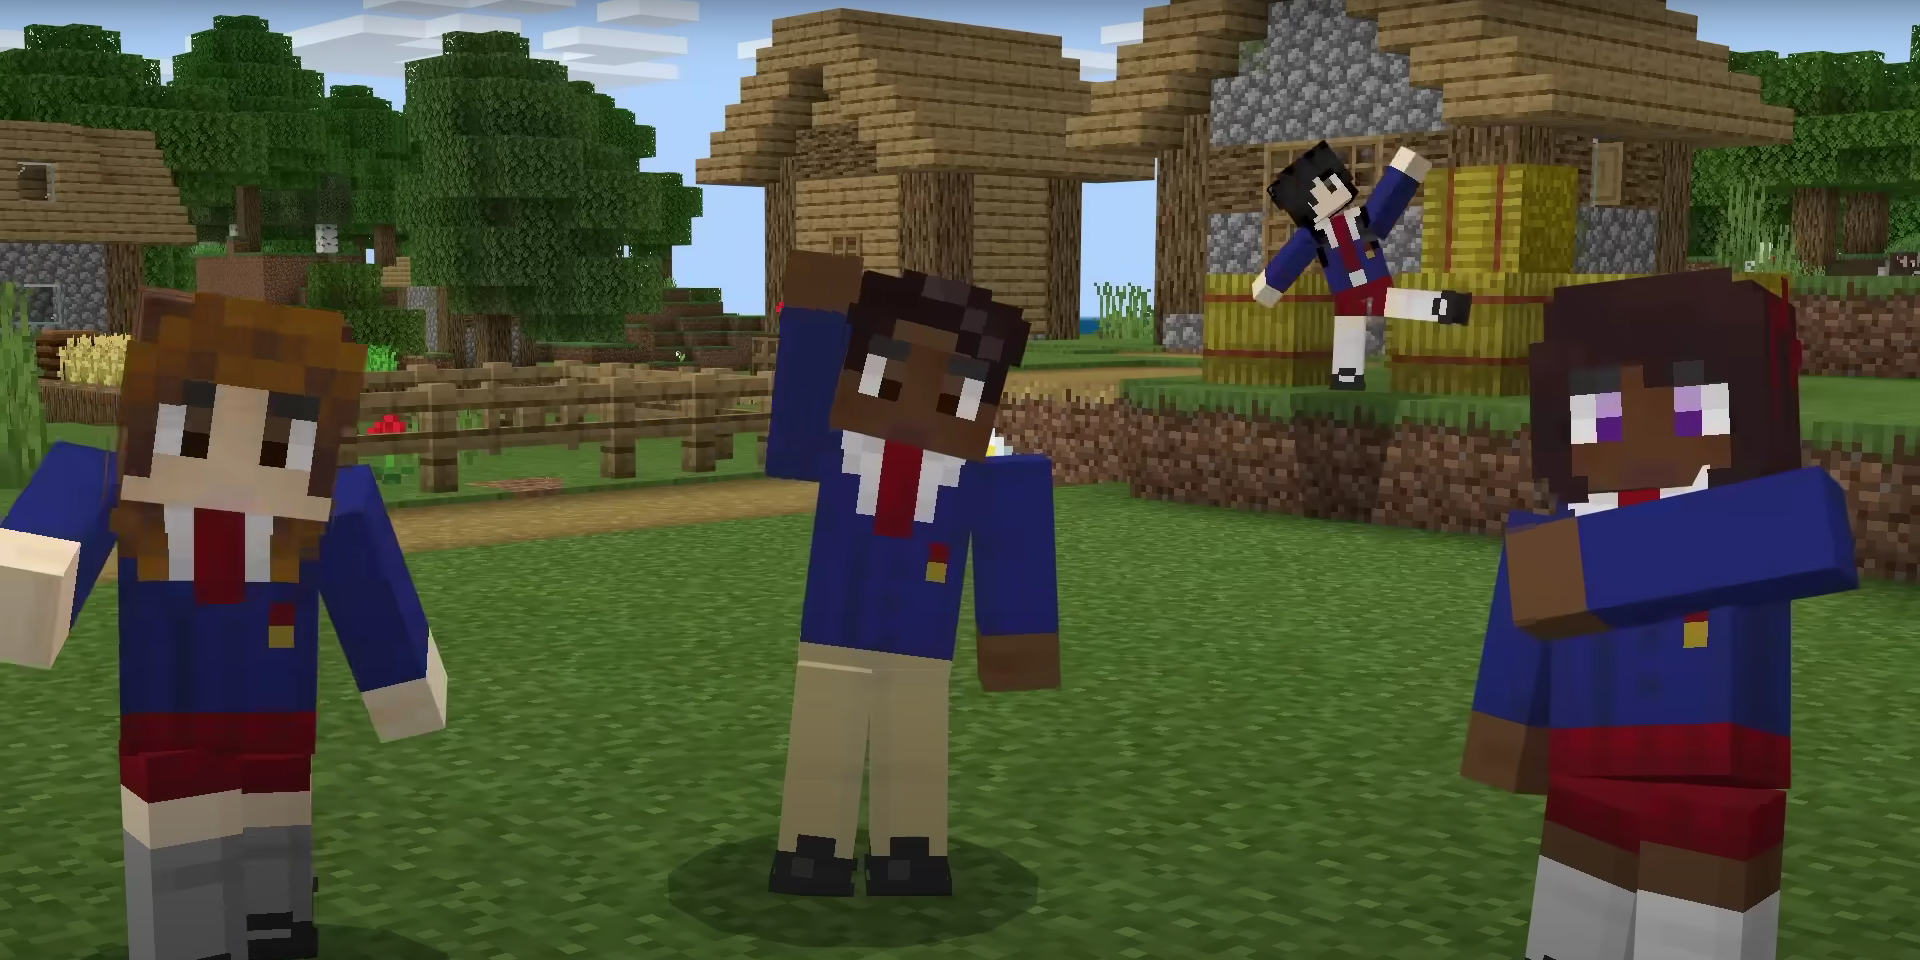 Minecraft Realms trailer with four friends hanging out